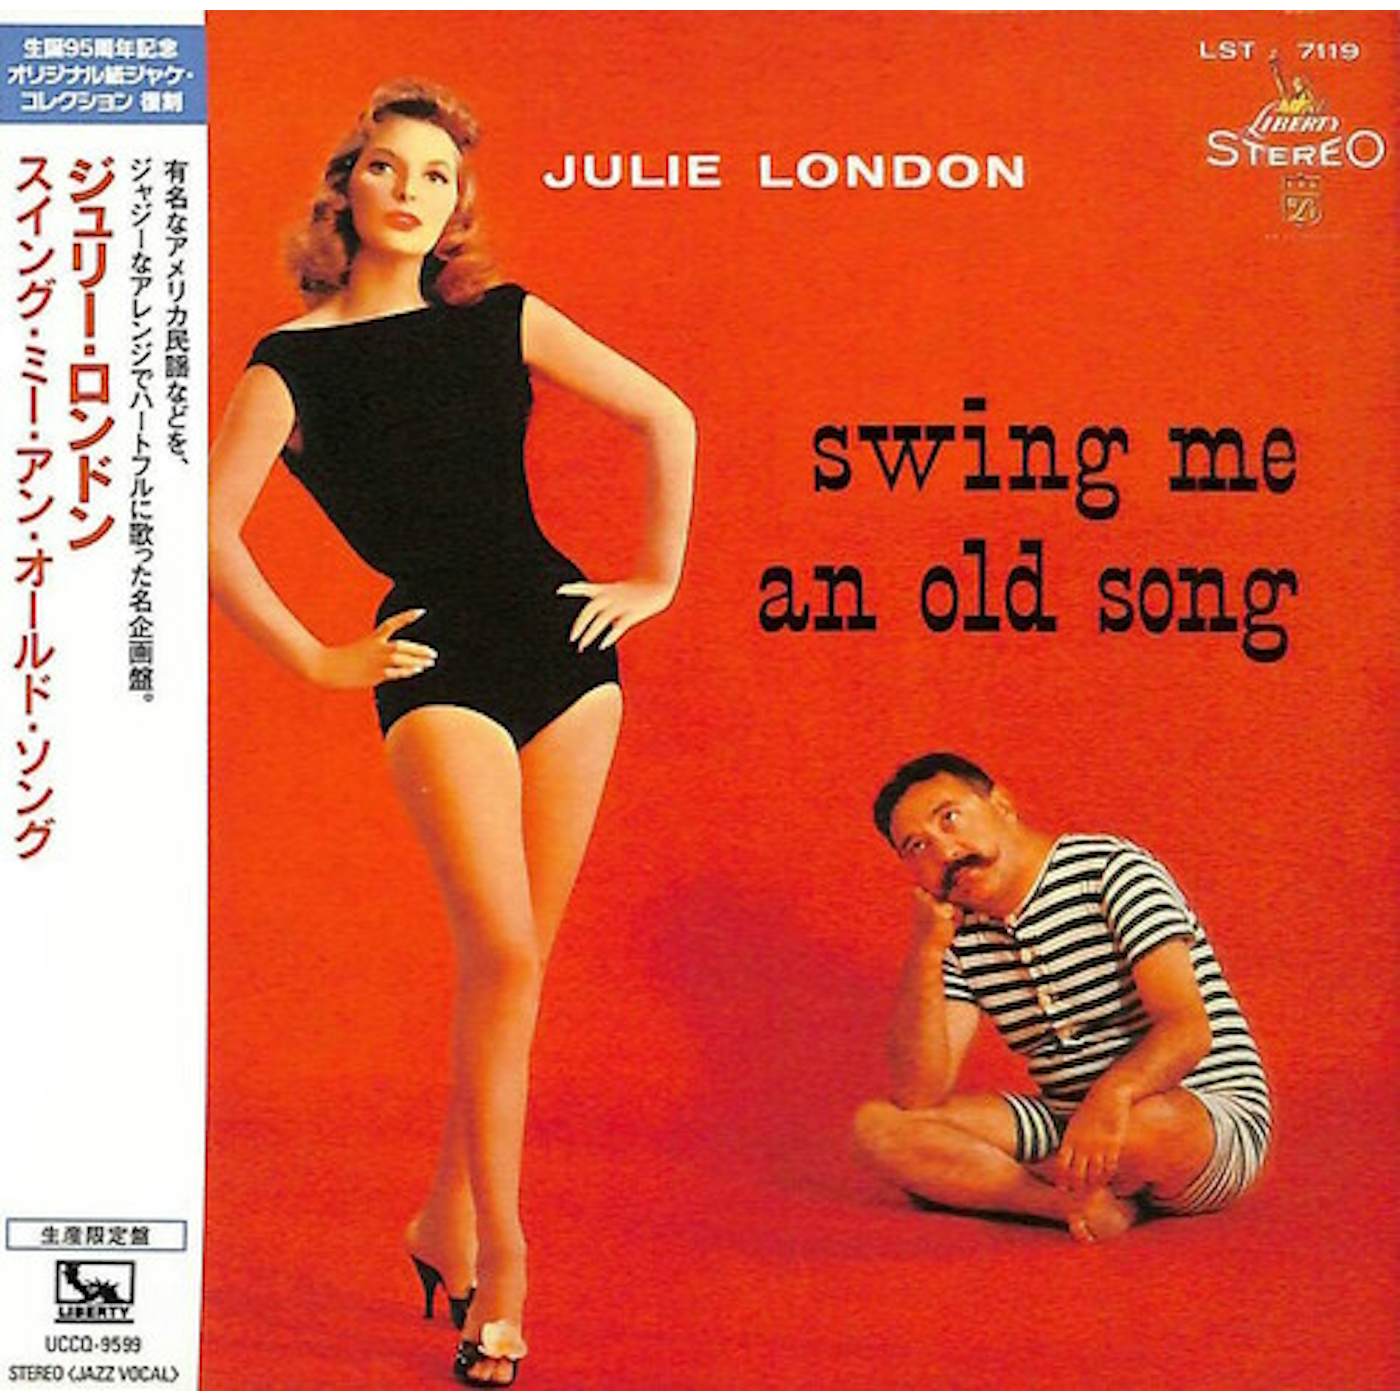 Julie London SWING ME AN OLD SONG CD